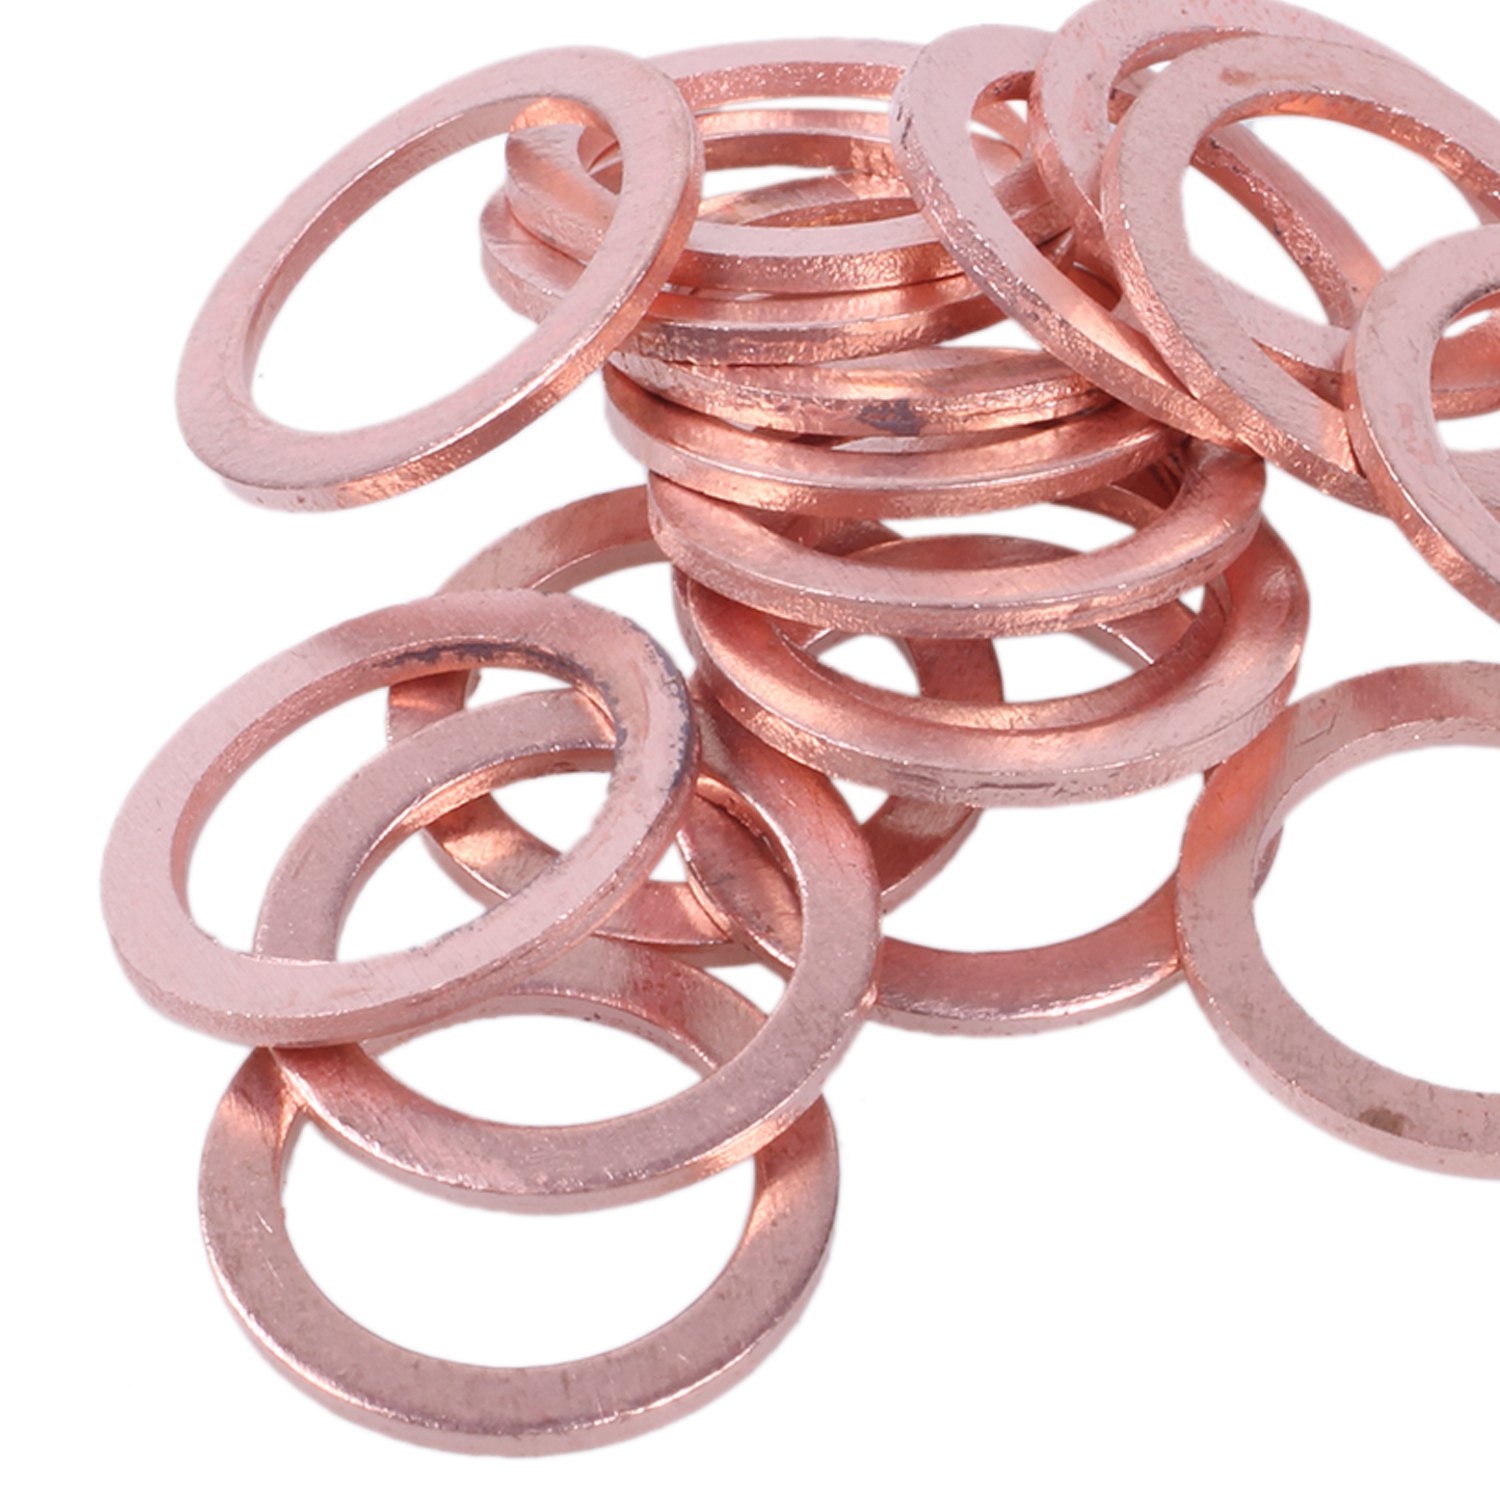 20 pcs 10mm x 14mm x 1mm copper washer seal spacer seal